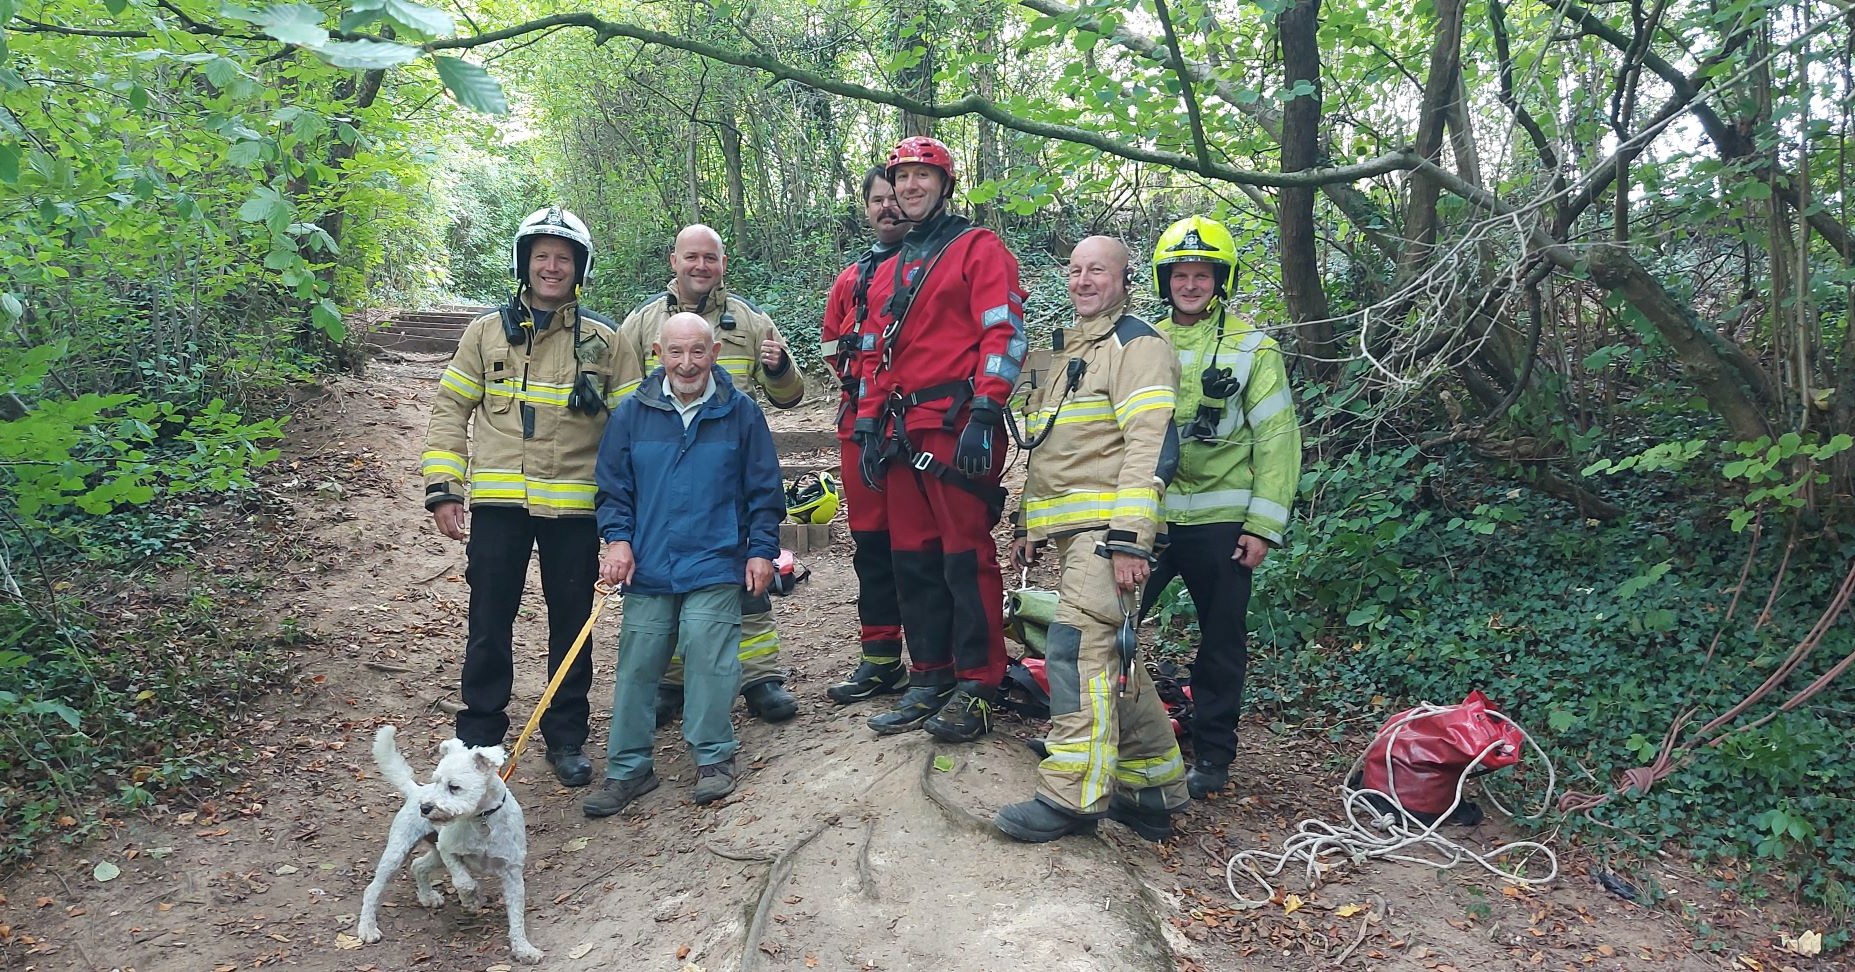 Fire service saves woman who dived into water to search for pet